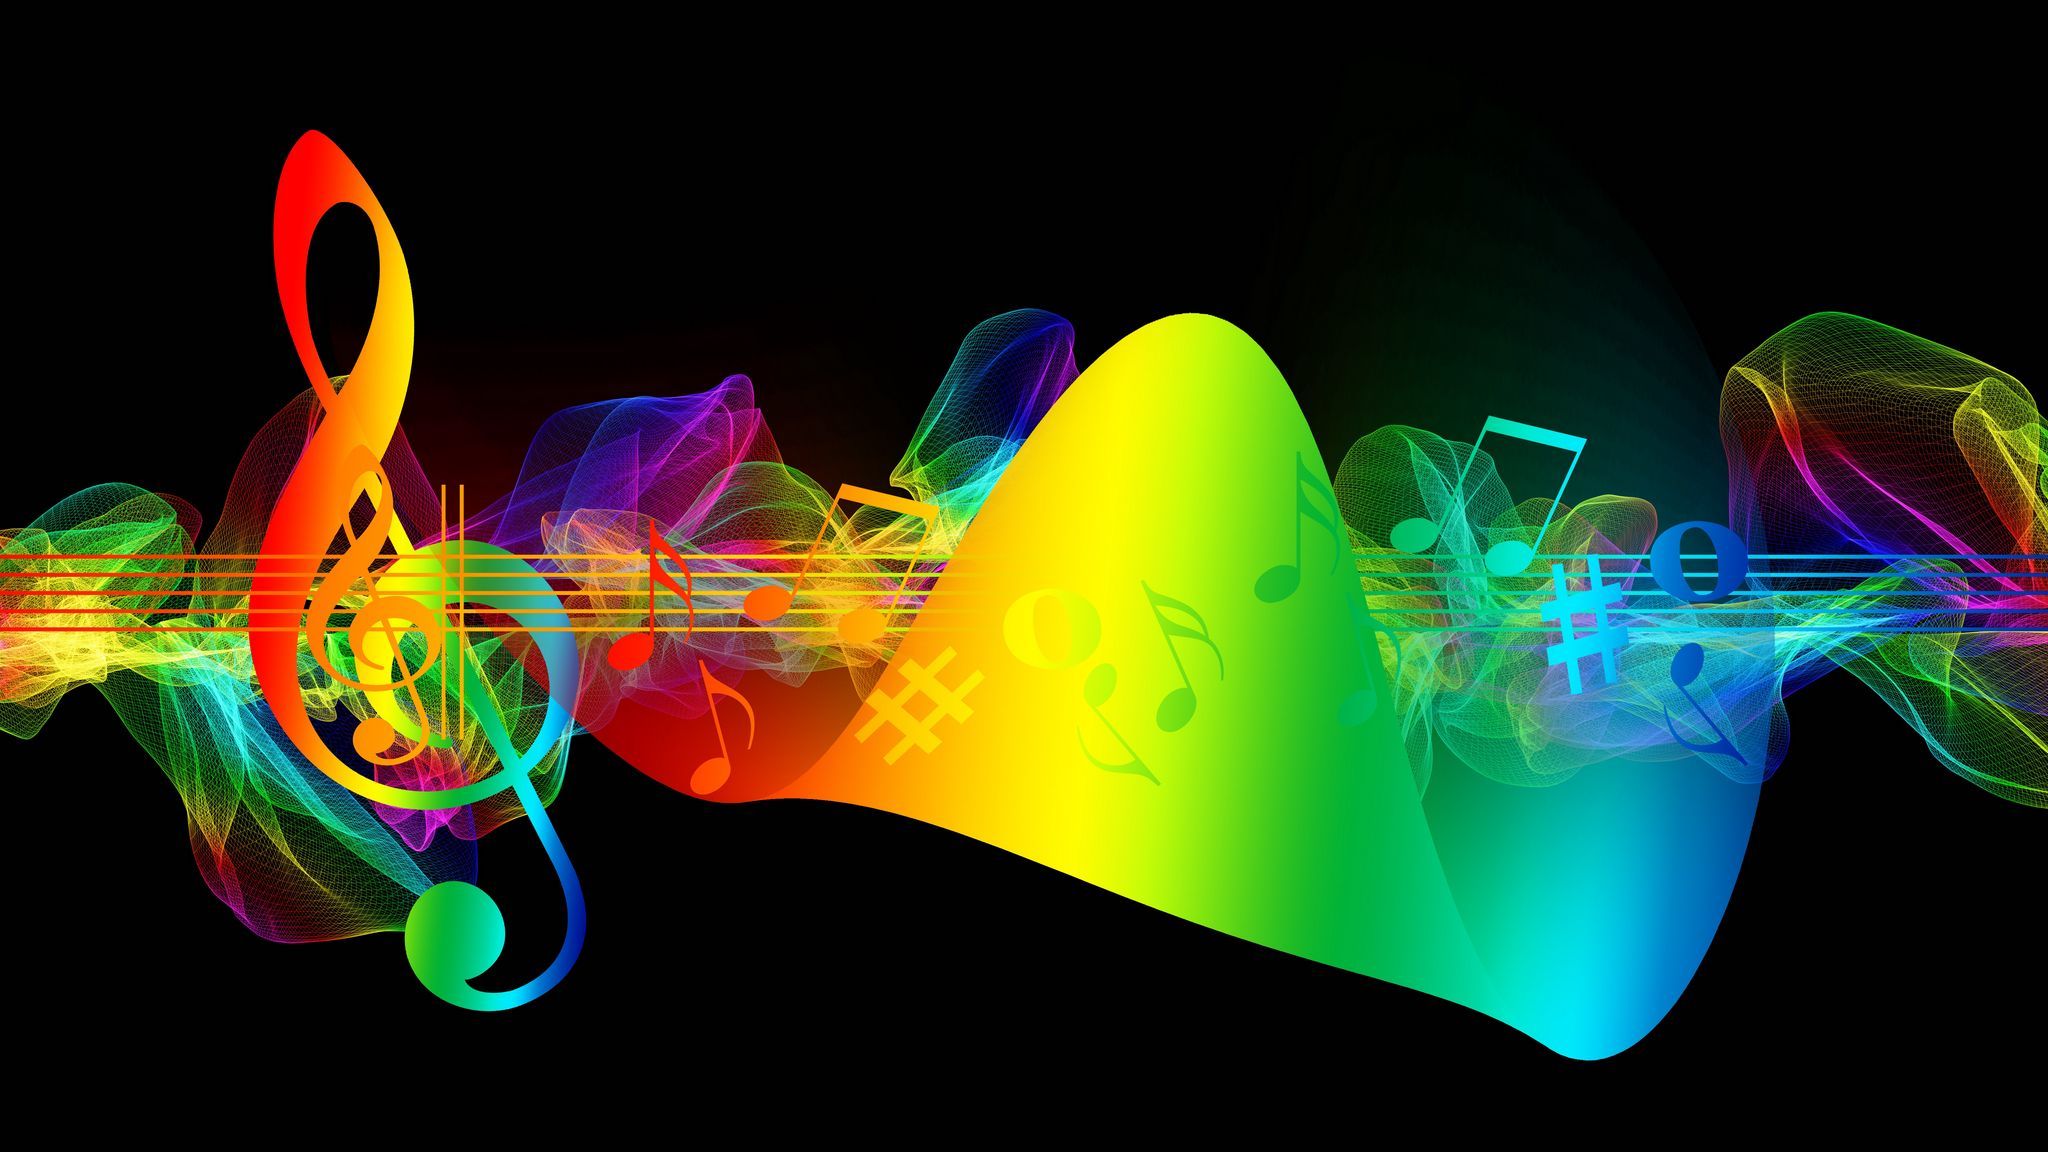 Download wallpapers 2048x1152 treble clef, musical notes, multicolored, rainbow ultrawide monitor hd backgrounds